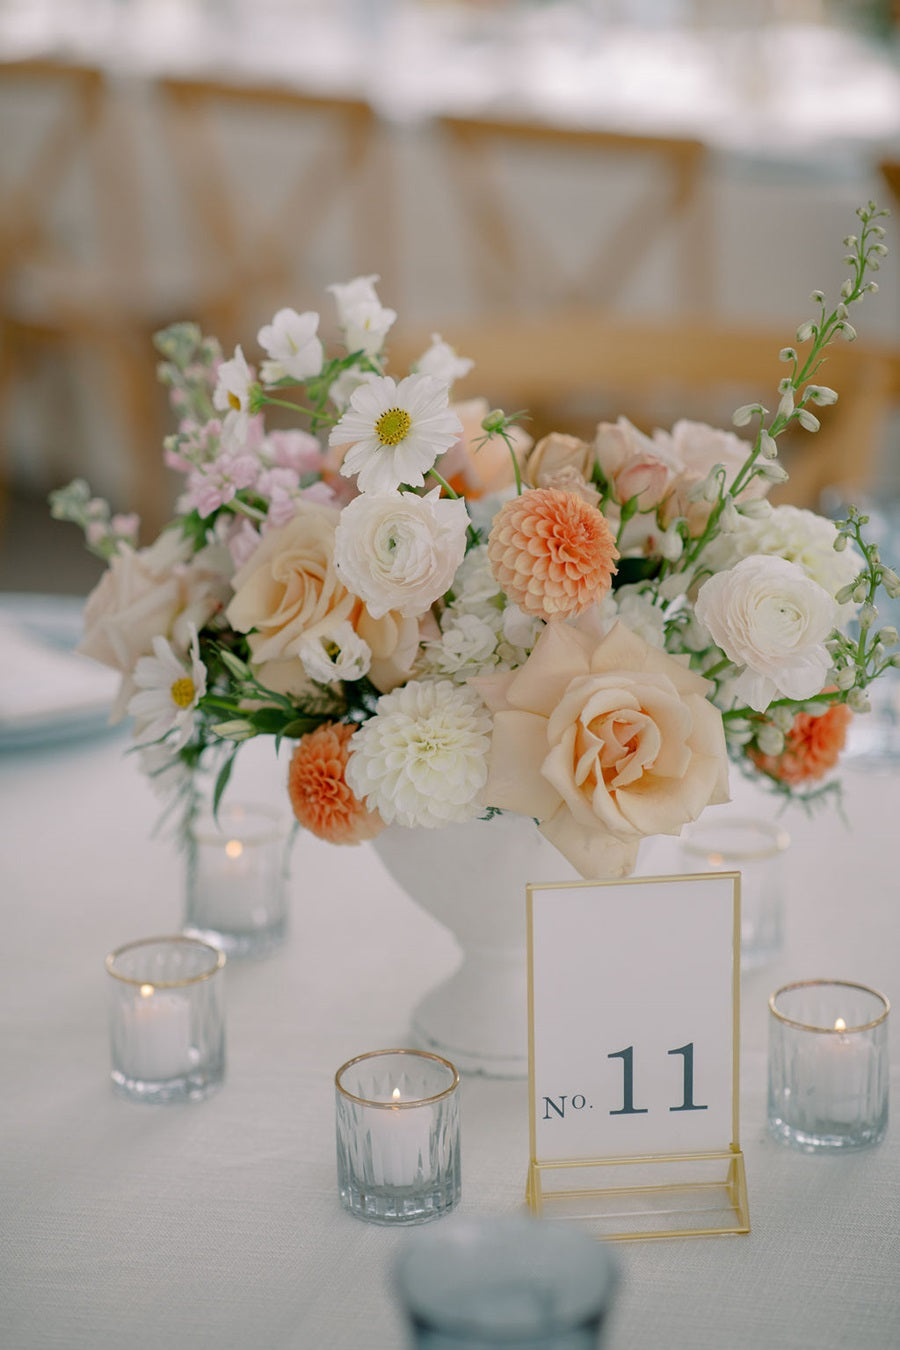 Close up on a floral centerpiece that has pink, white, orange, peach, and green. In a white compote vase. Table is set with blue and gold. Some of the flowers pictured are roses, dahlias, hydrangea, and fern.